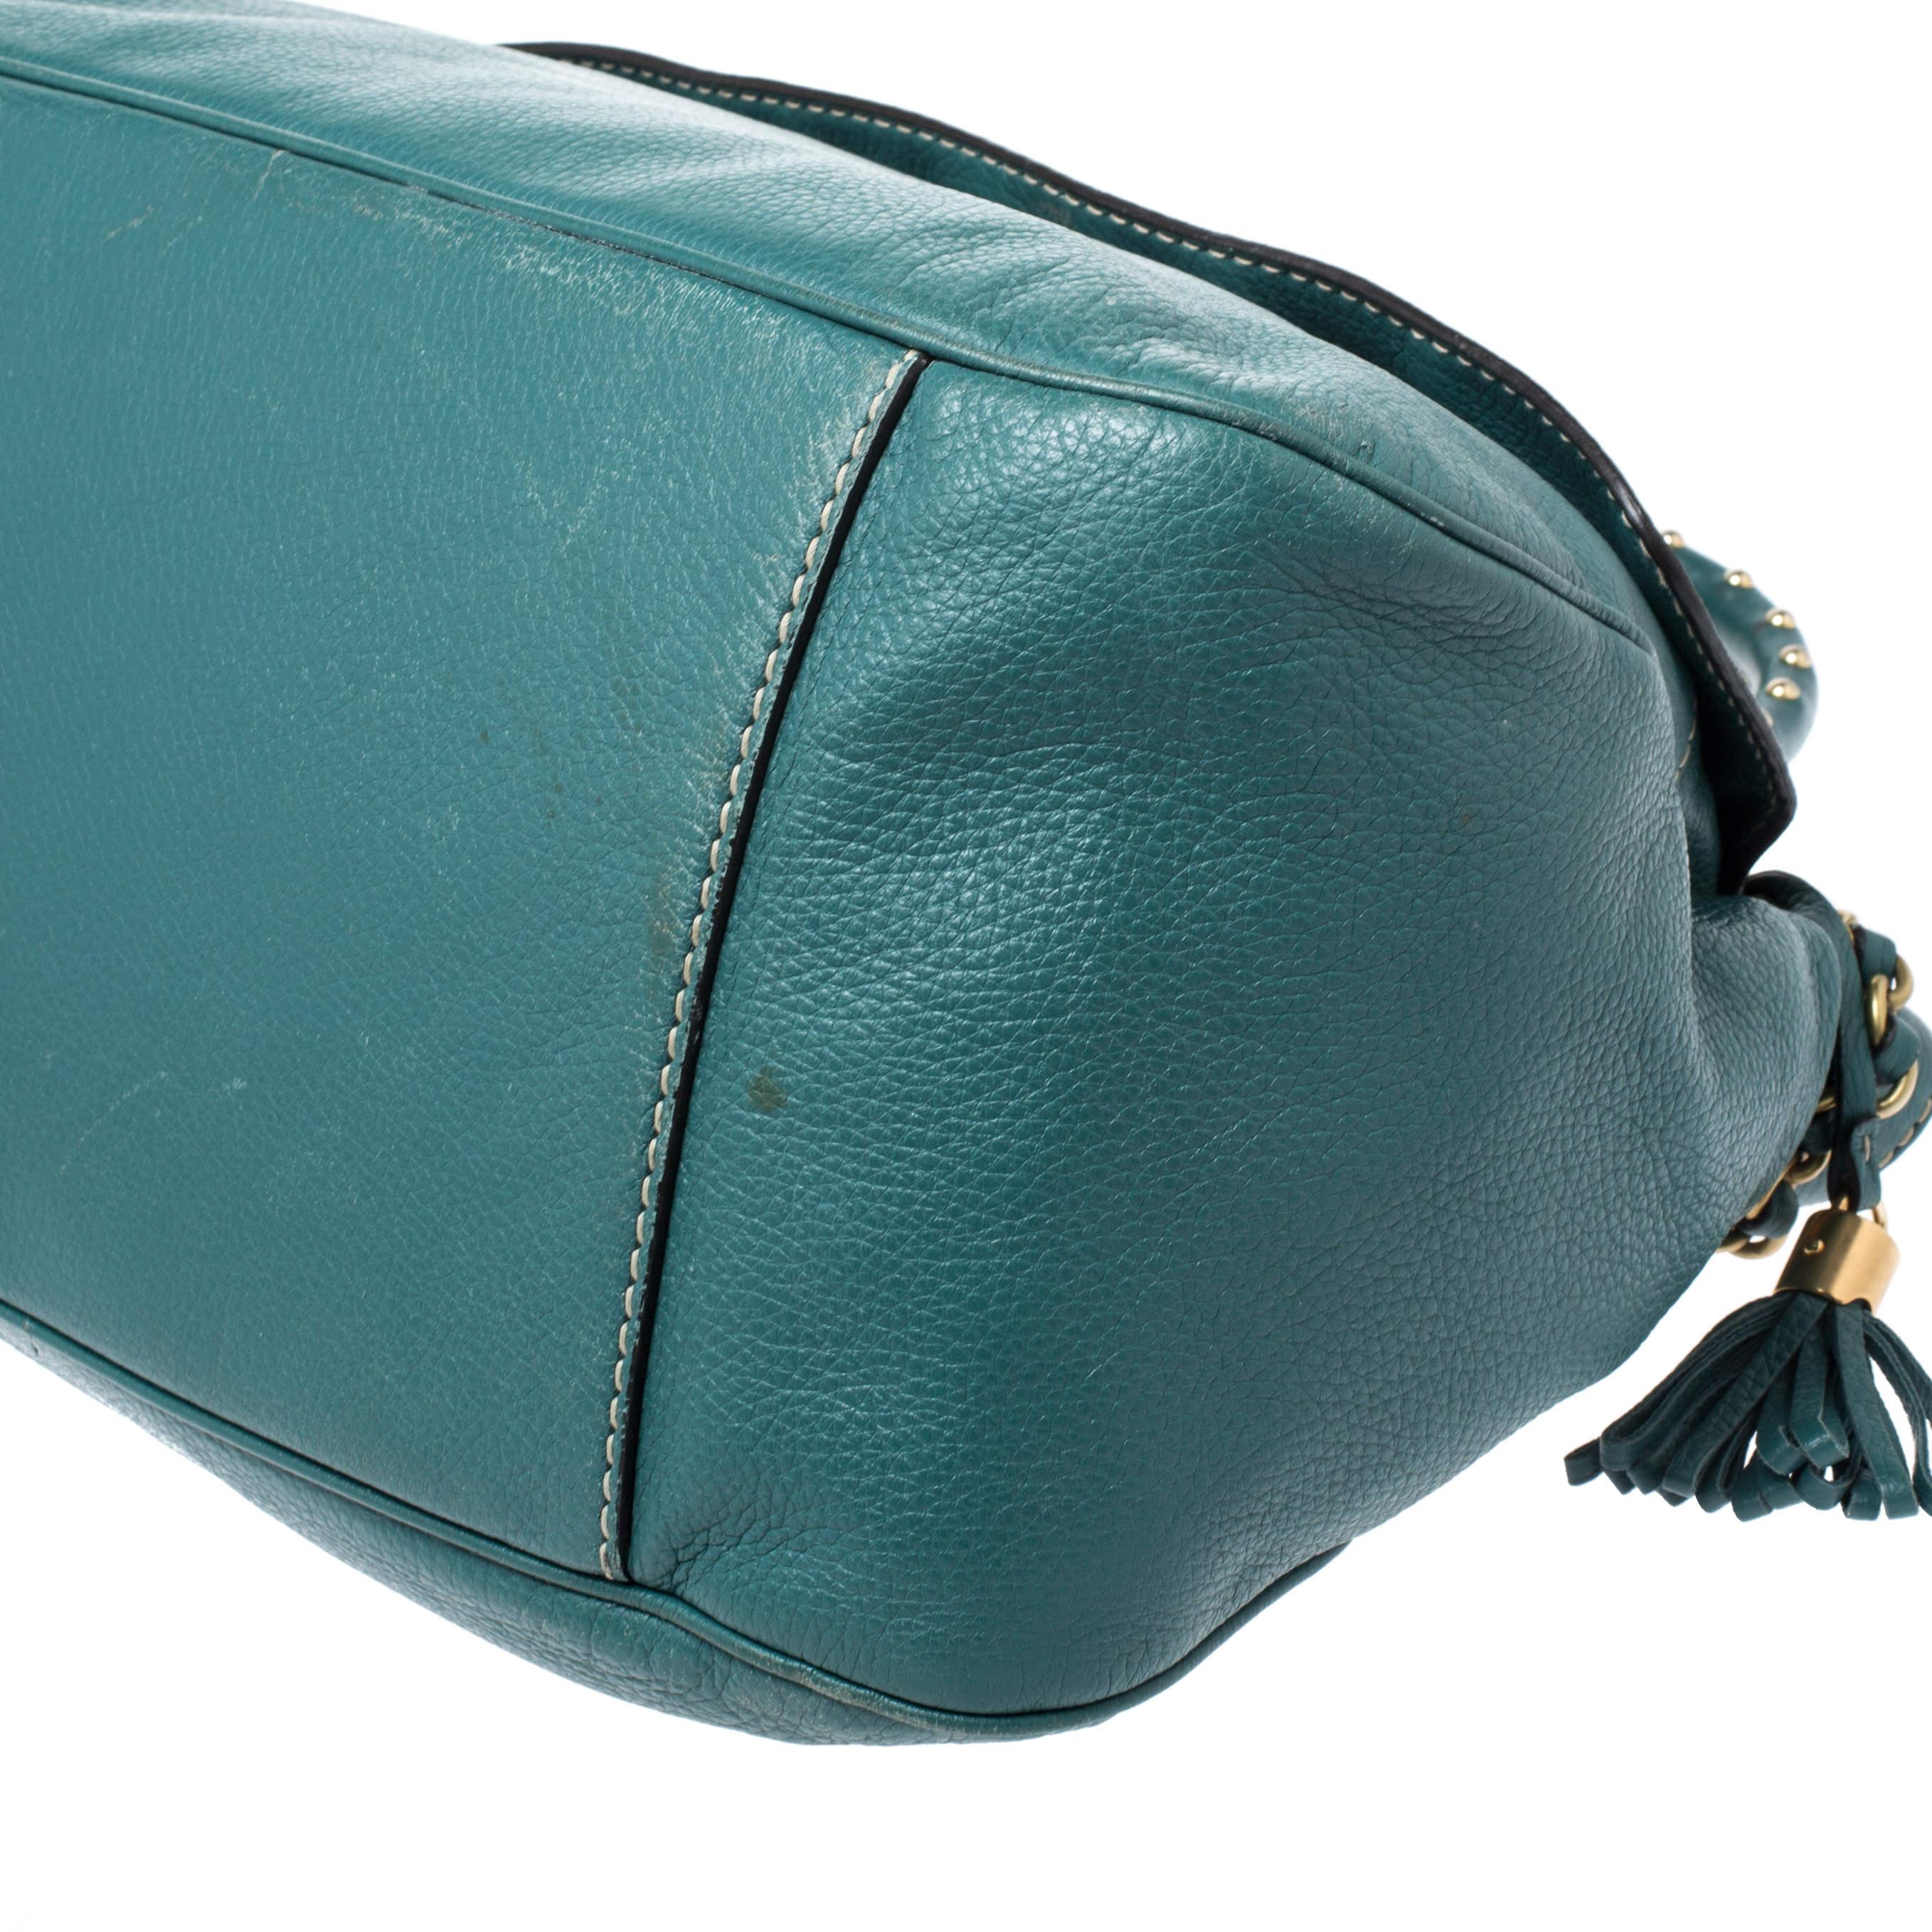 Dolce & Gabbana Green Leather Miss Charlotte Satchel For Sale 6